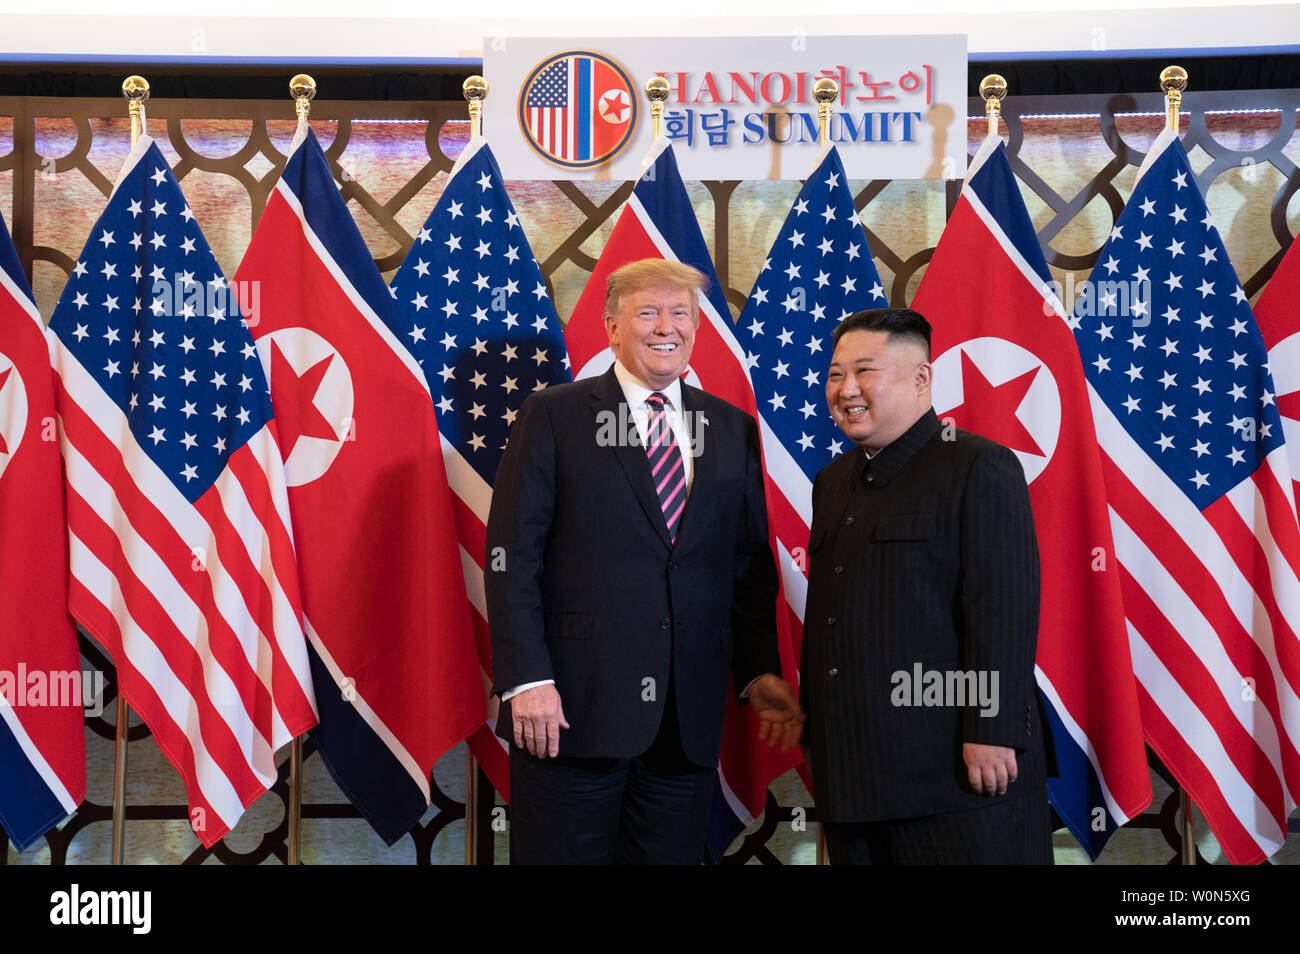 President Donald J. Trump is greeted by Kim Jong Un, Chairman of the State Affairs Commission of the Democratic People’s Republic of Korea, on February 27, 2019, at the Sofitel Legend Metropole hotel in Hanoi, for their second summit meeting. White House Photo by Shealah Craighead/UPI Stock Photo